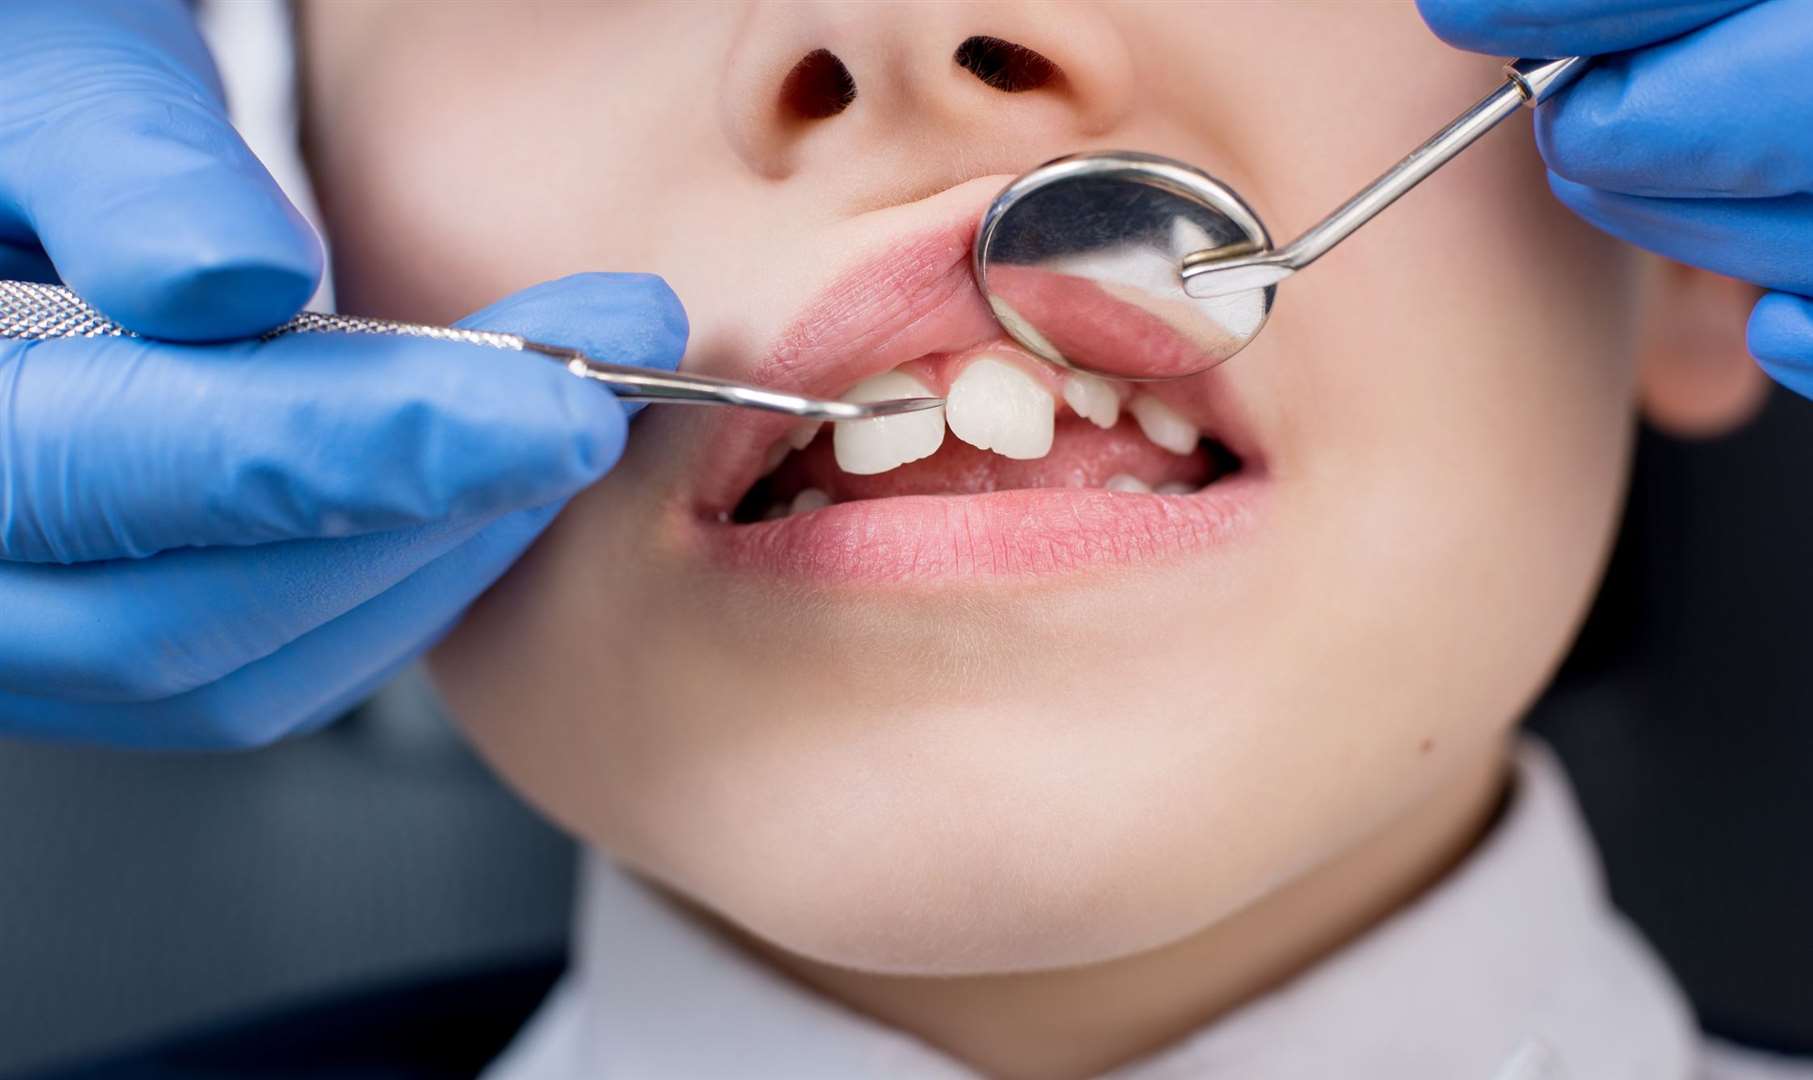 Many dentists are moving from the NHS to private practice and are no longer accepting NHS patients credit: istock/anatoliy gleb